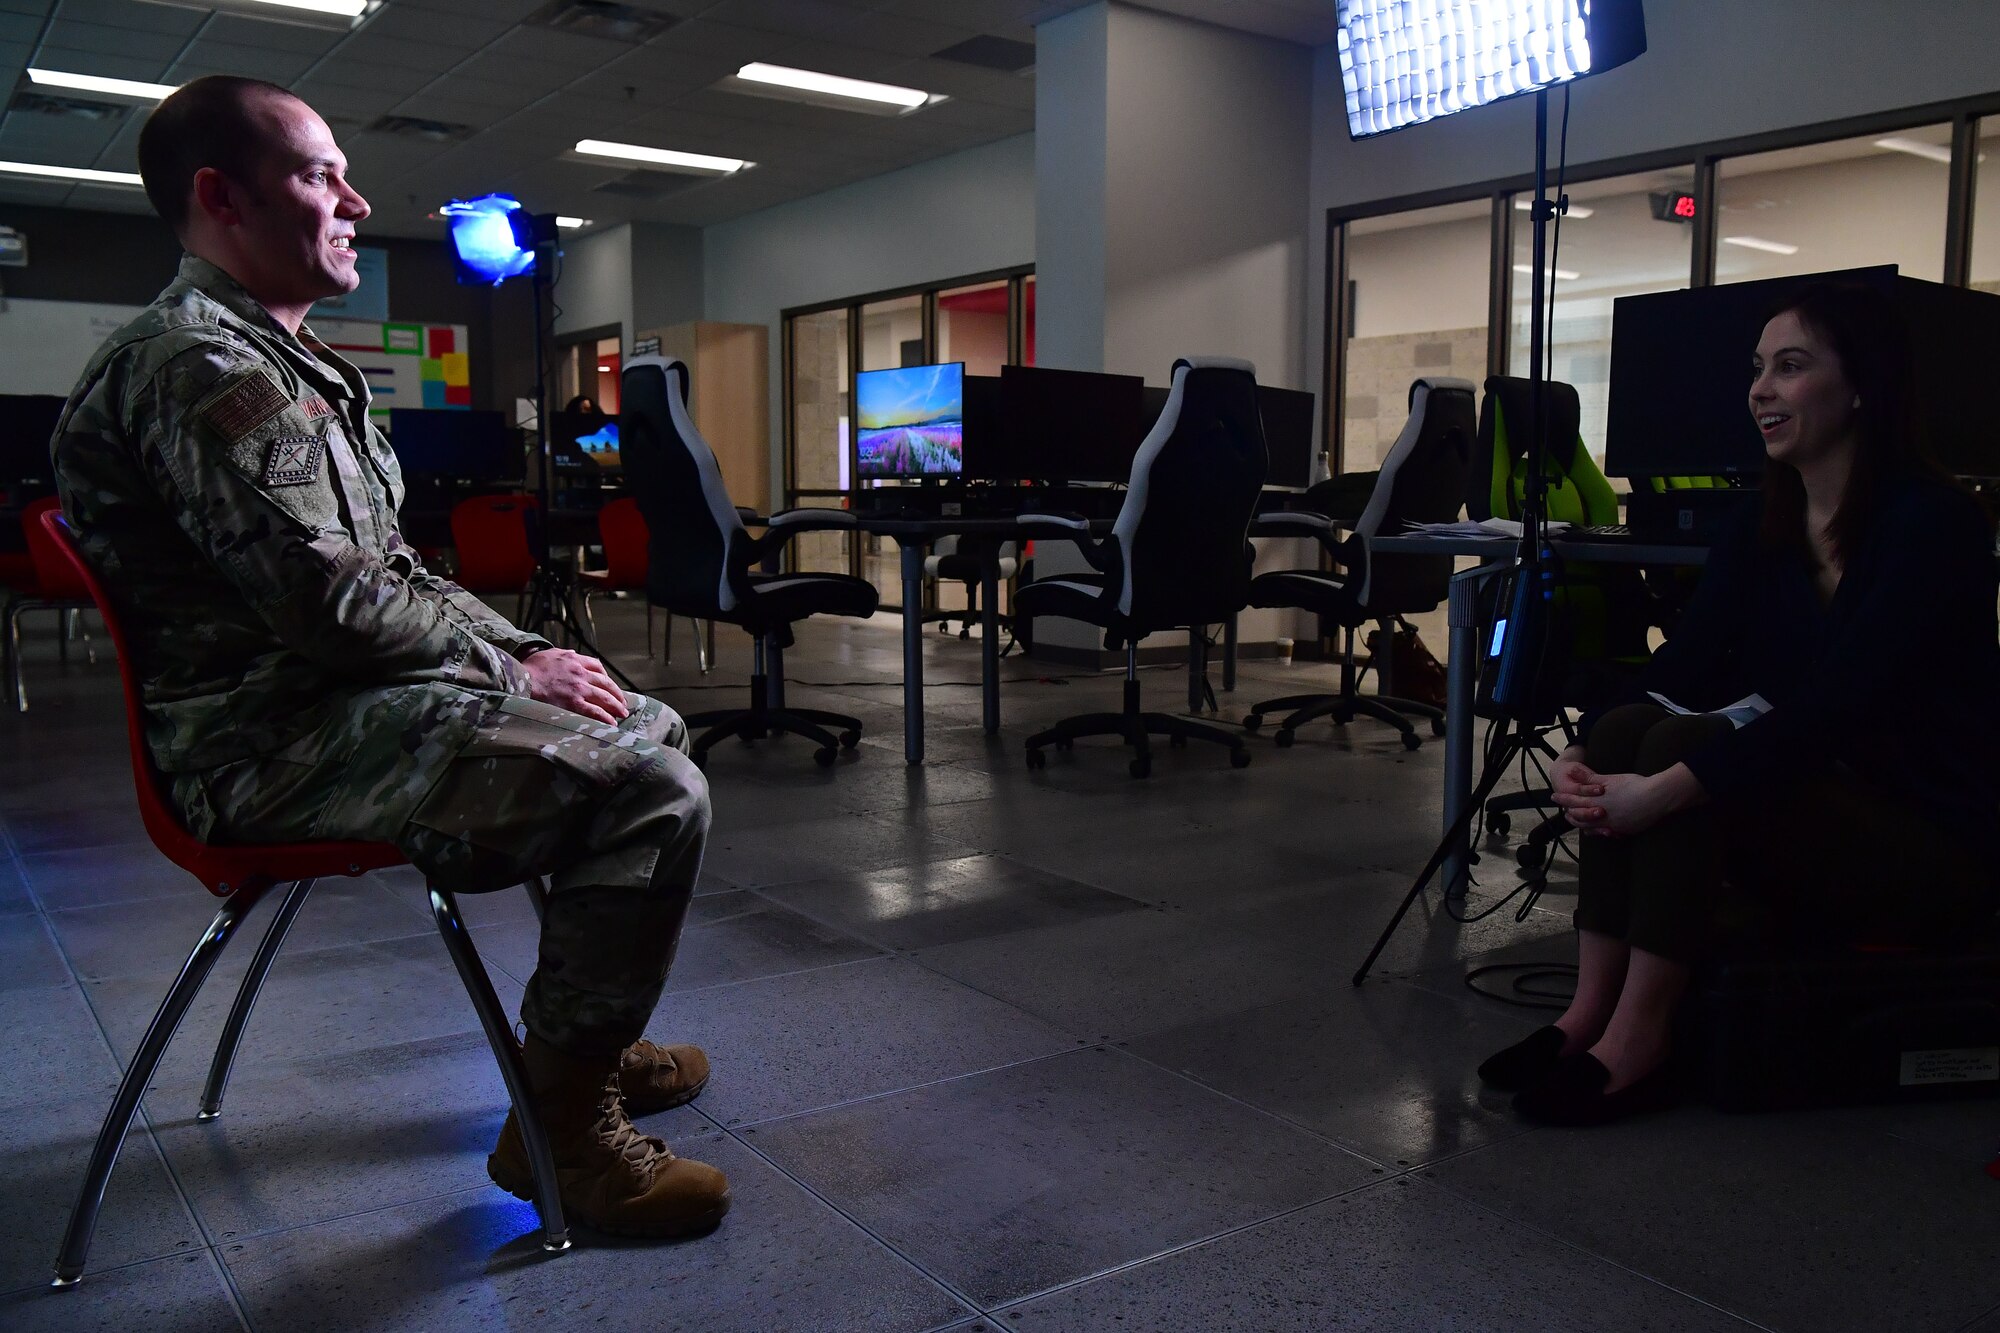 Grace Marvin, Association of Defense Communities director of communications, conducts an interview with U.S. Air Force 1st Lt. Thomas Van Dorple, 223rd Cyberspace Operations Squadron flight commander.